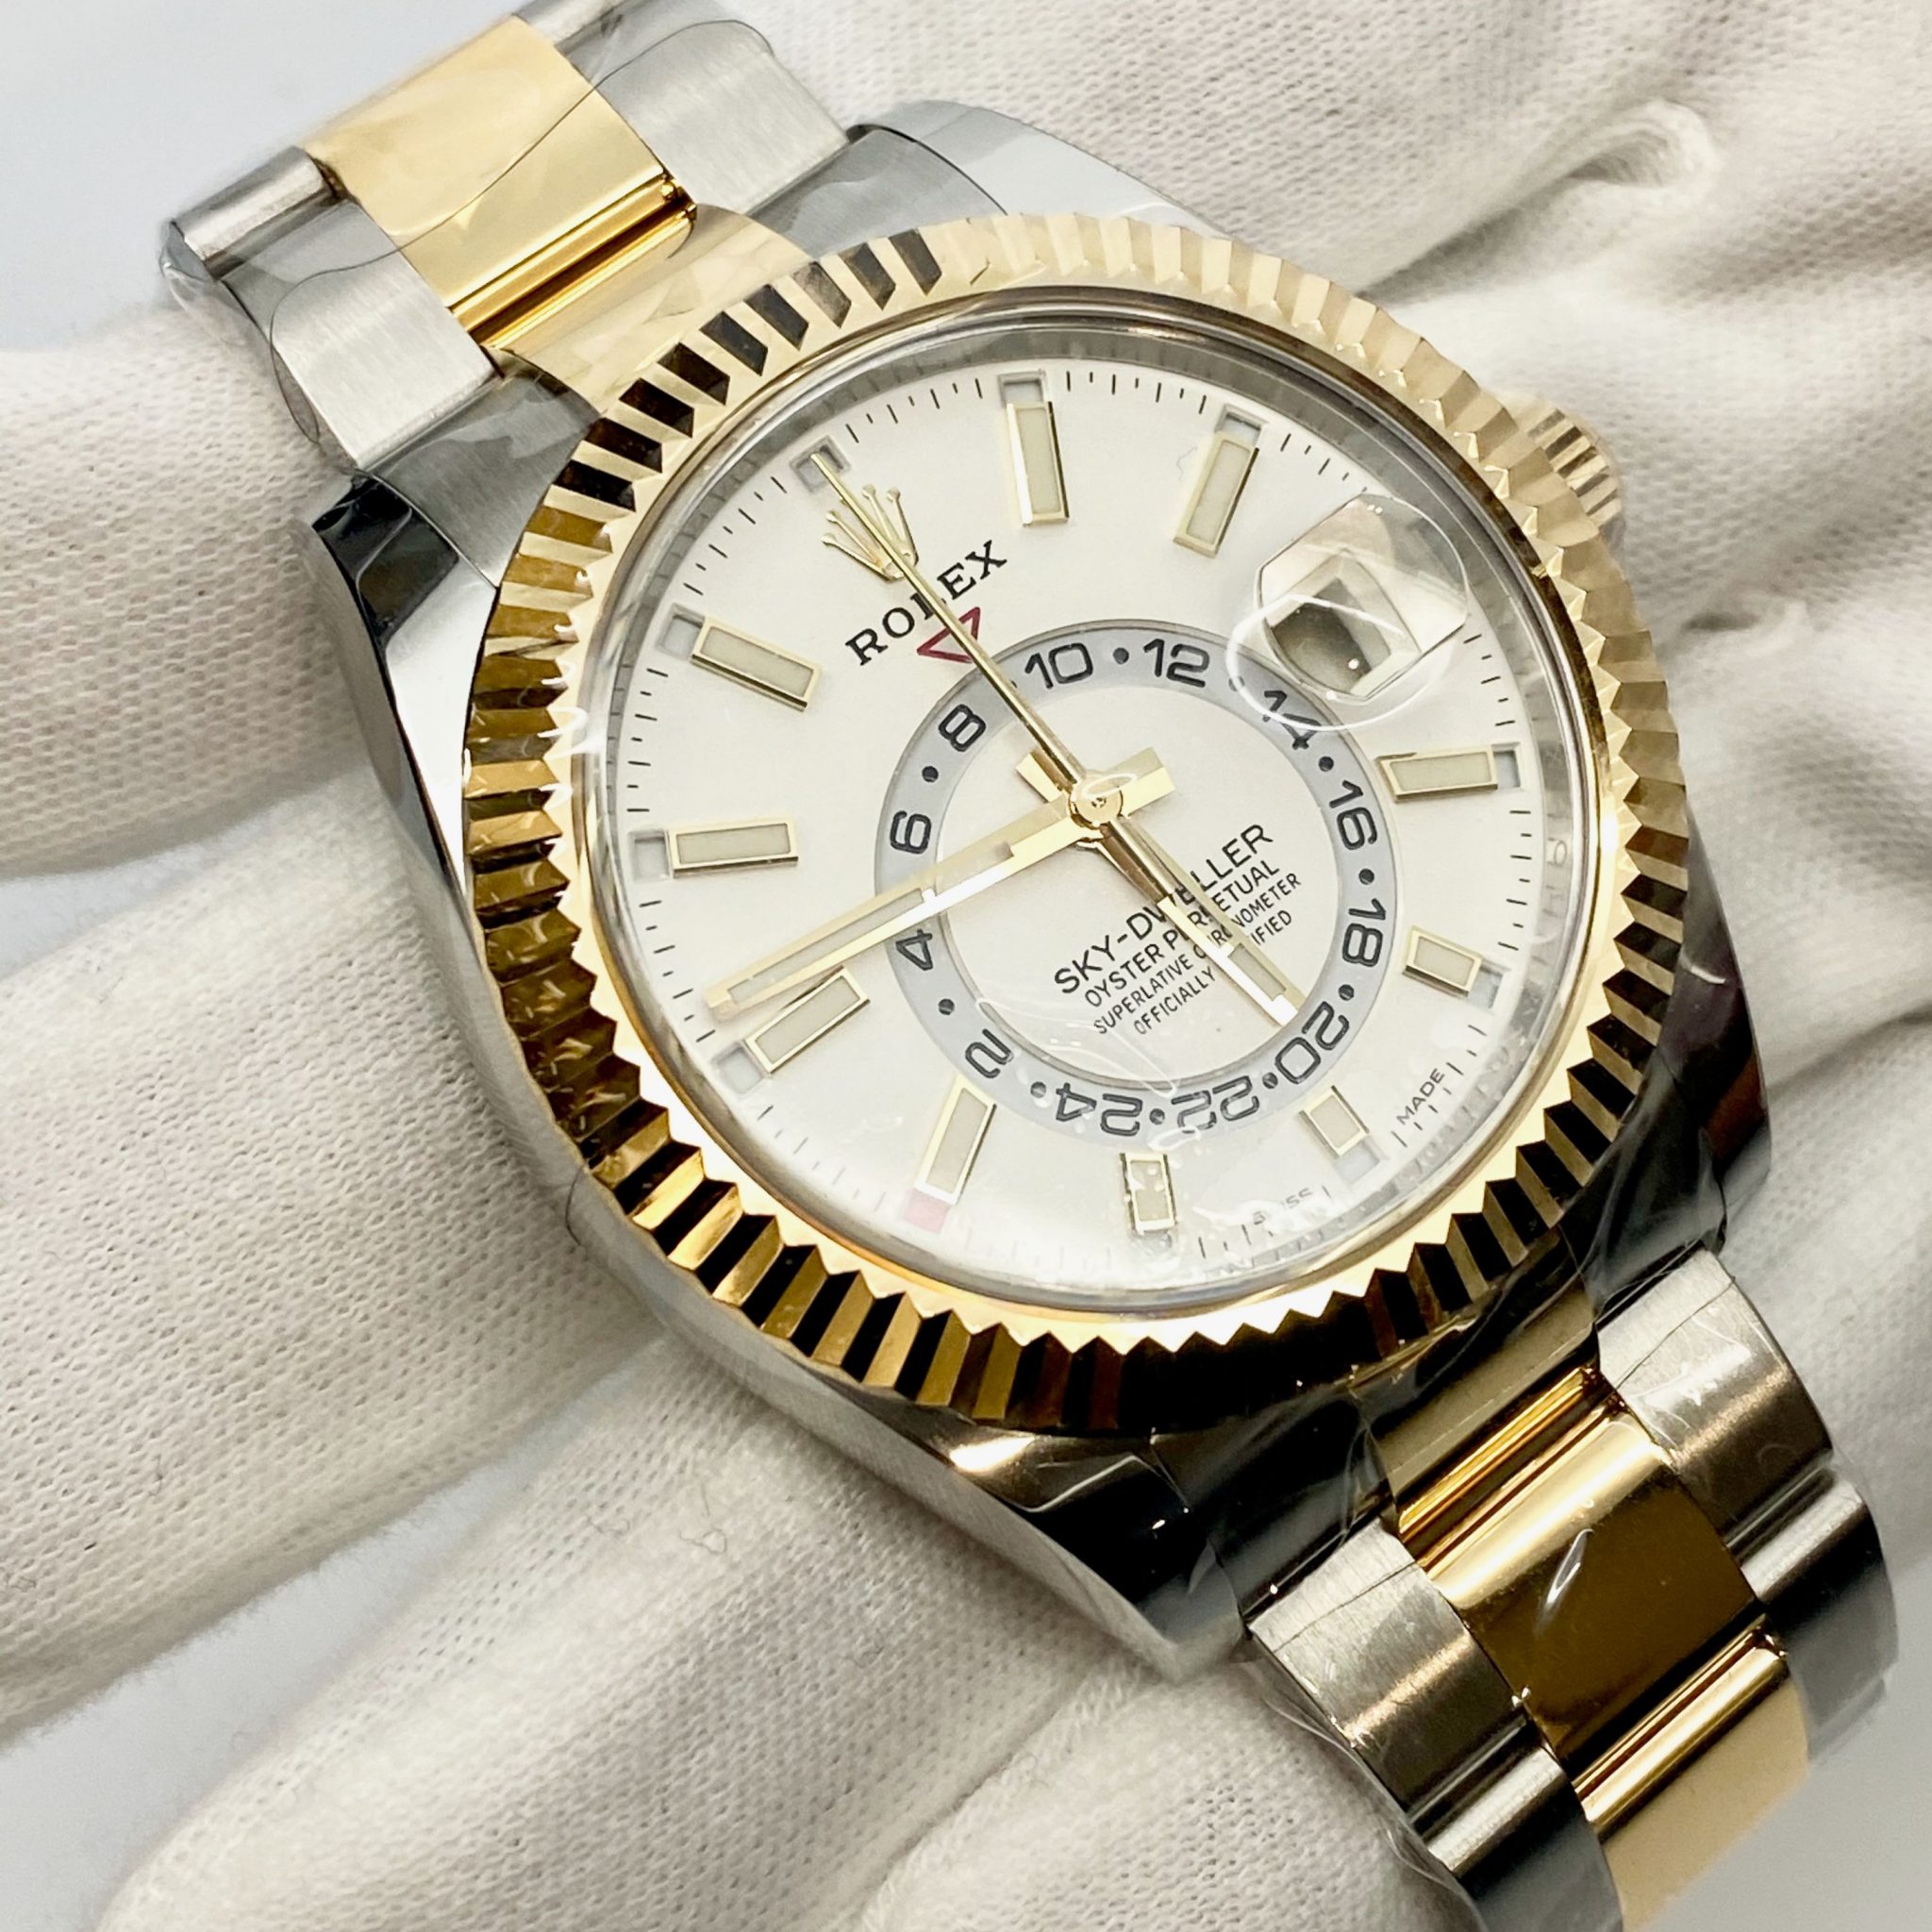 This Is Everything You Need To Know About The Rolex SkyDweller